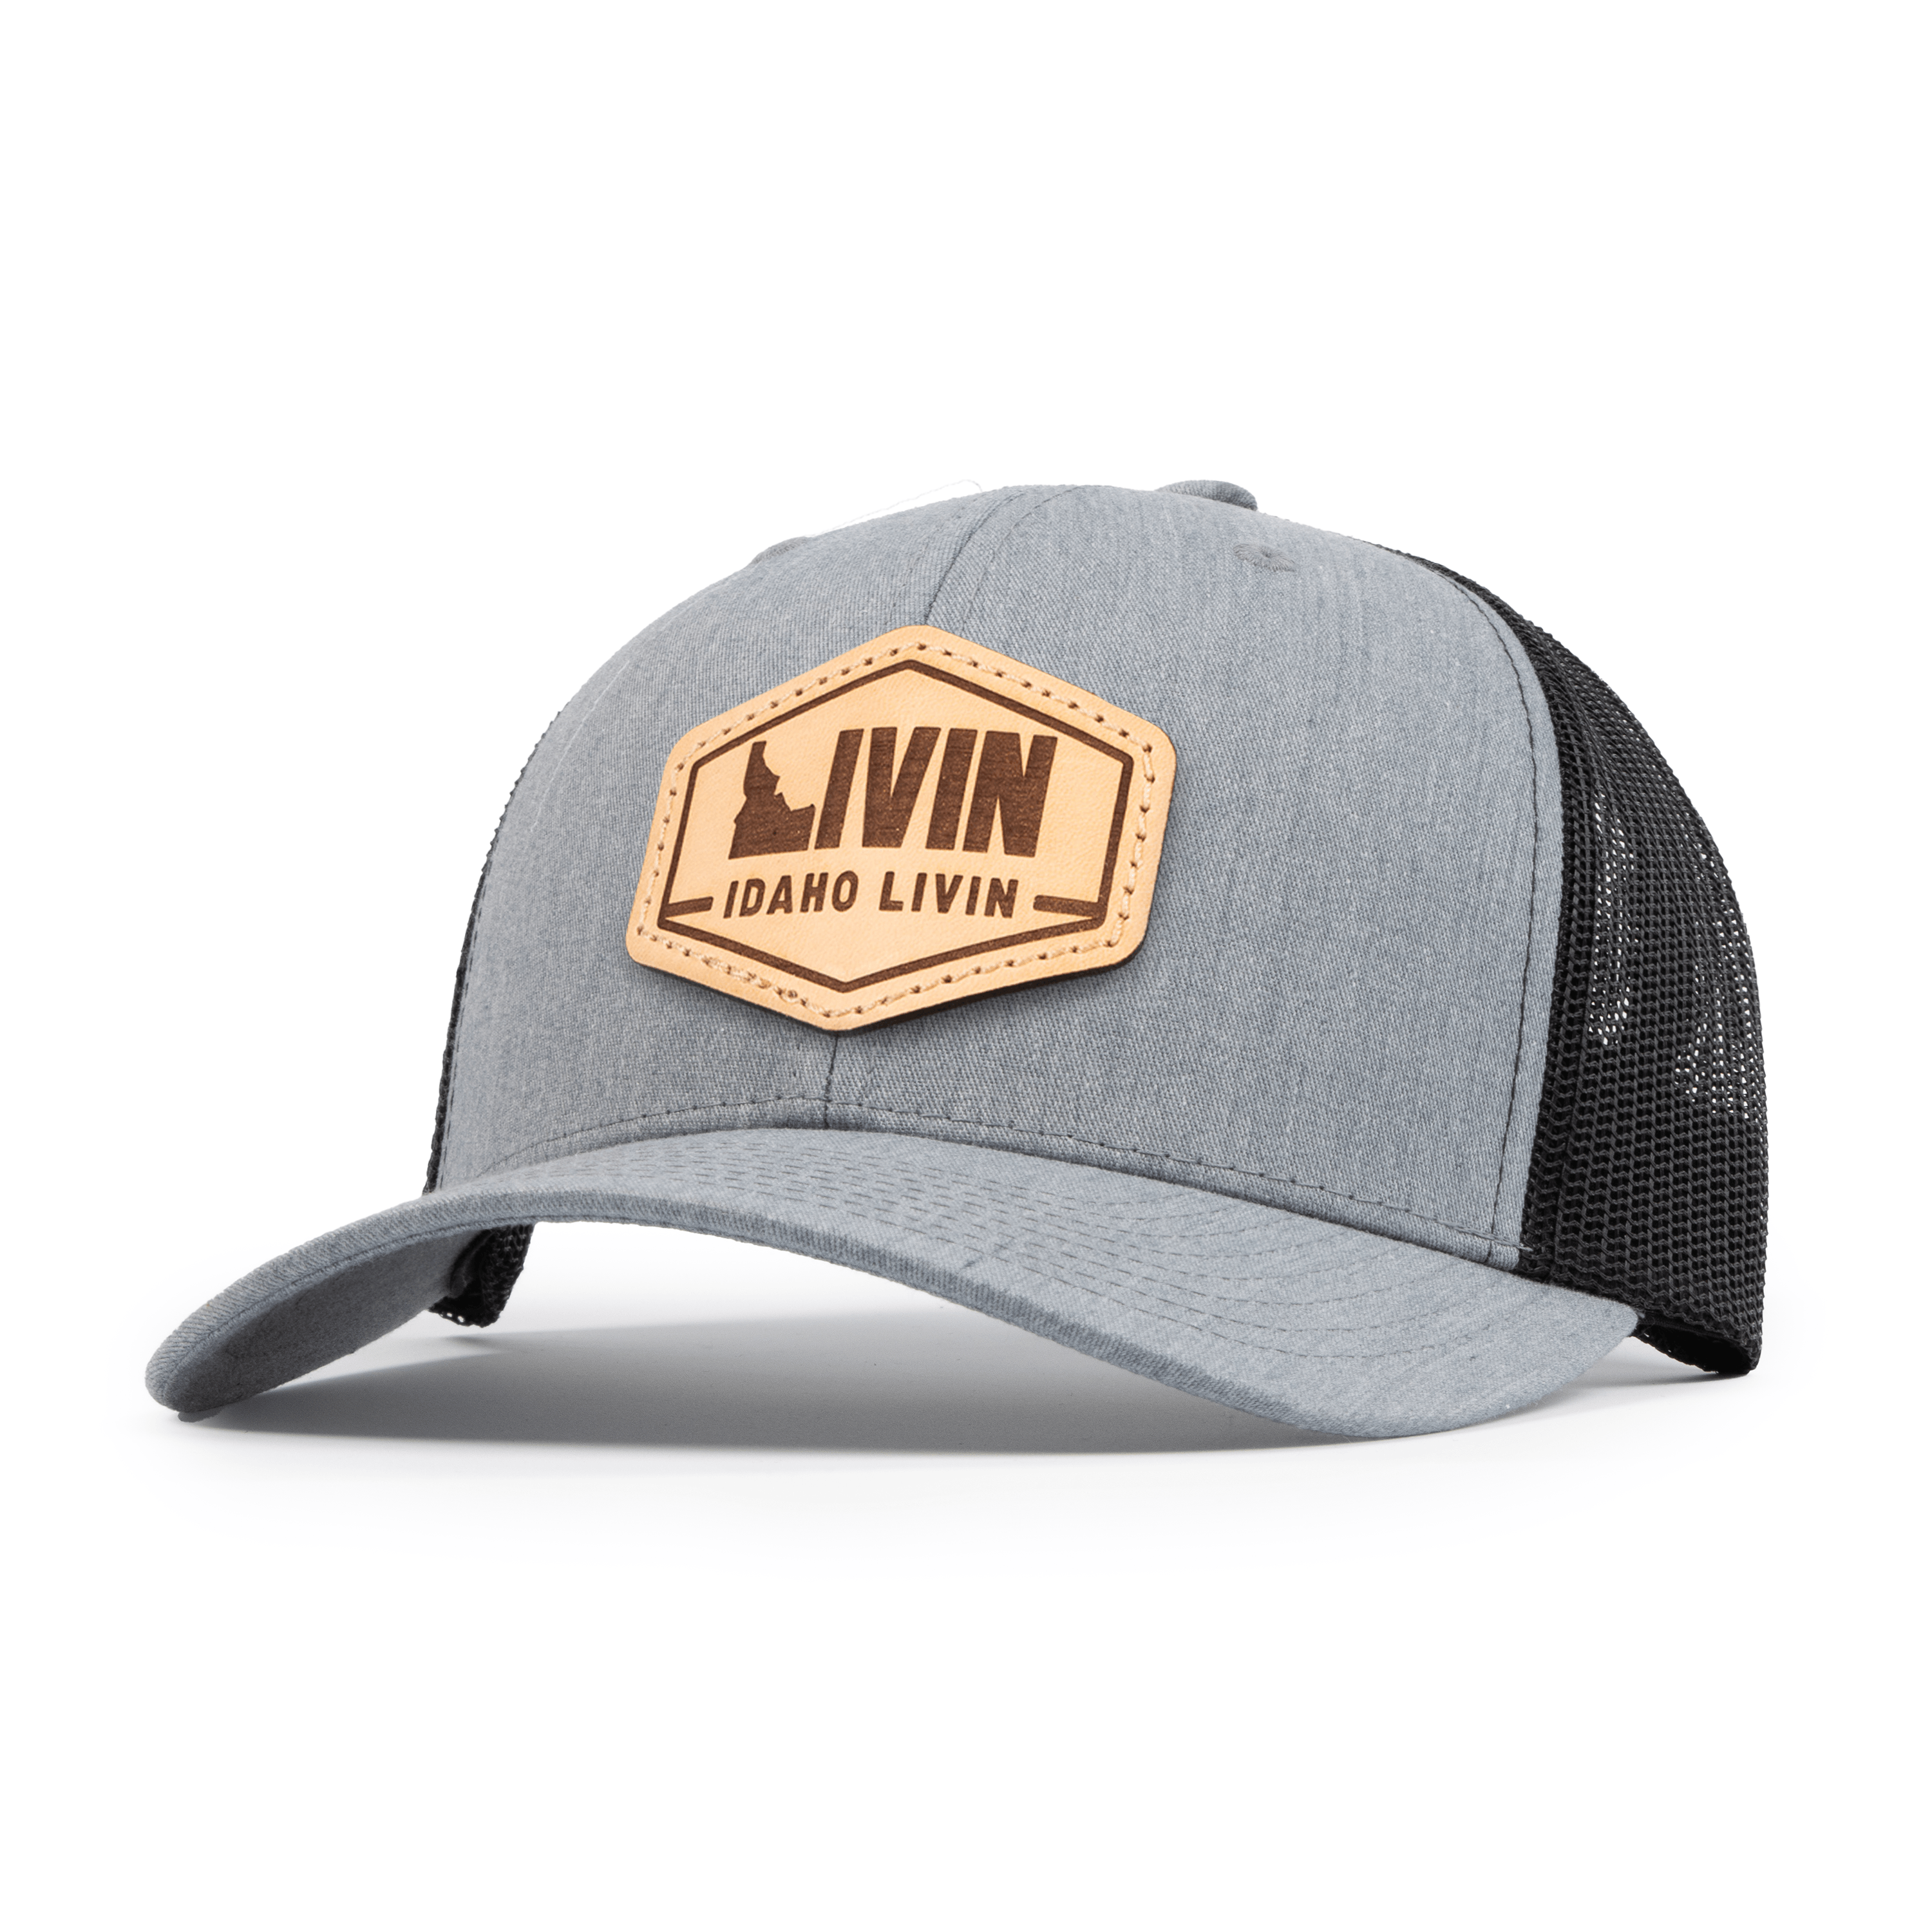 Hex Leather Patch Classic Trucker Hat - Idaho Livin